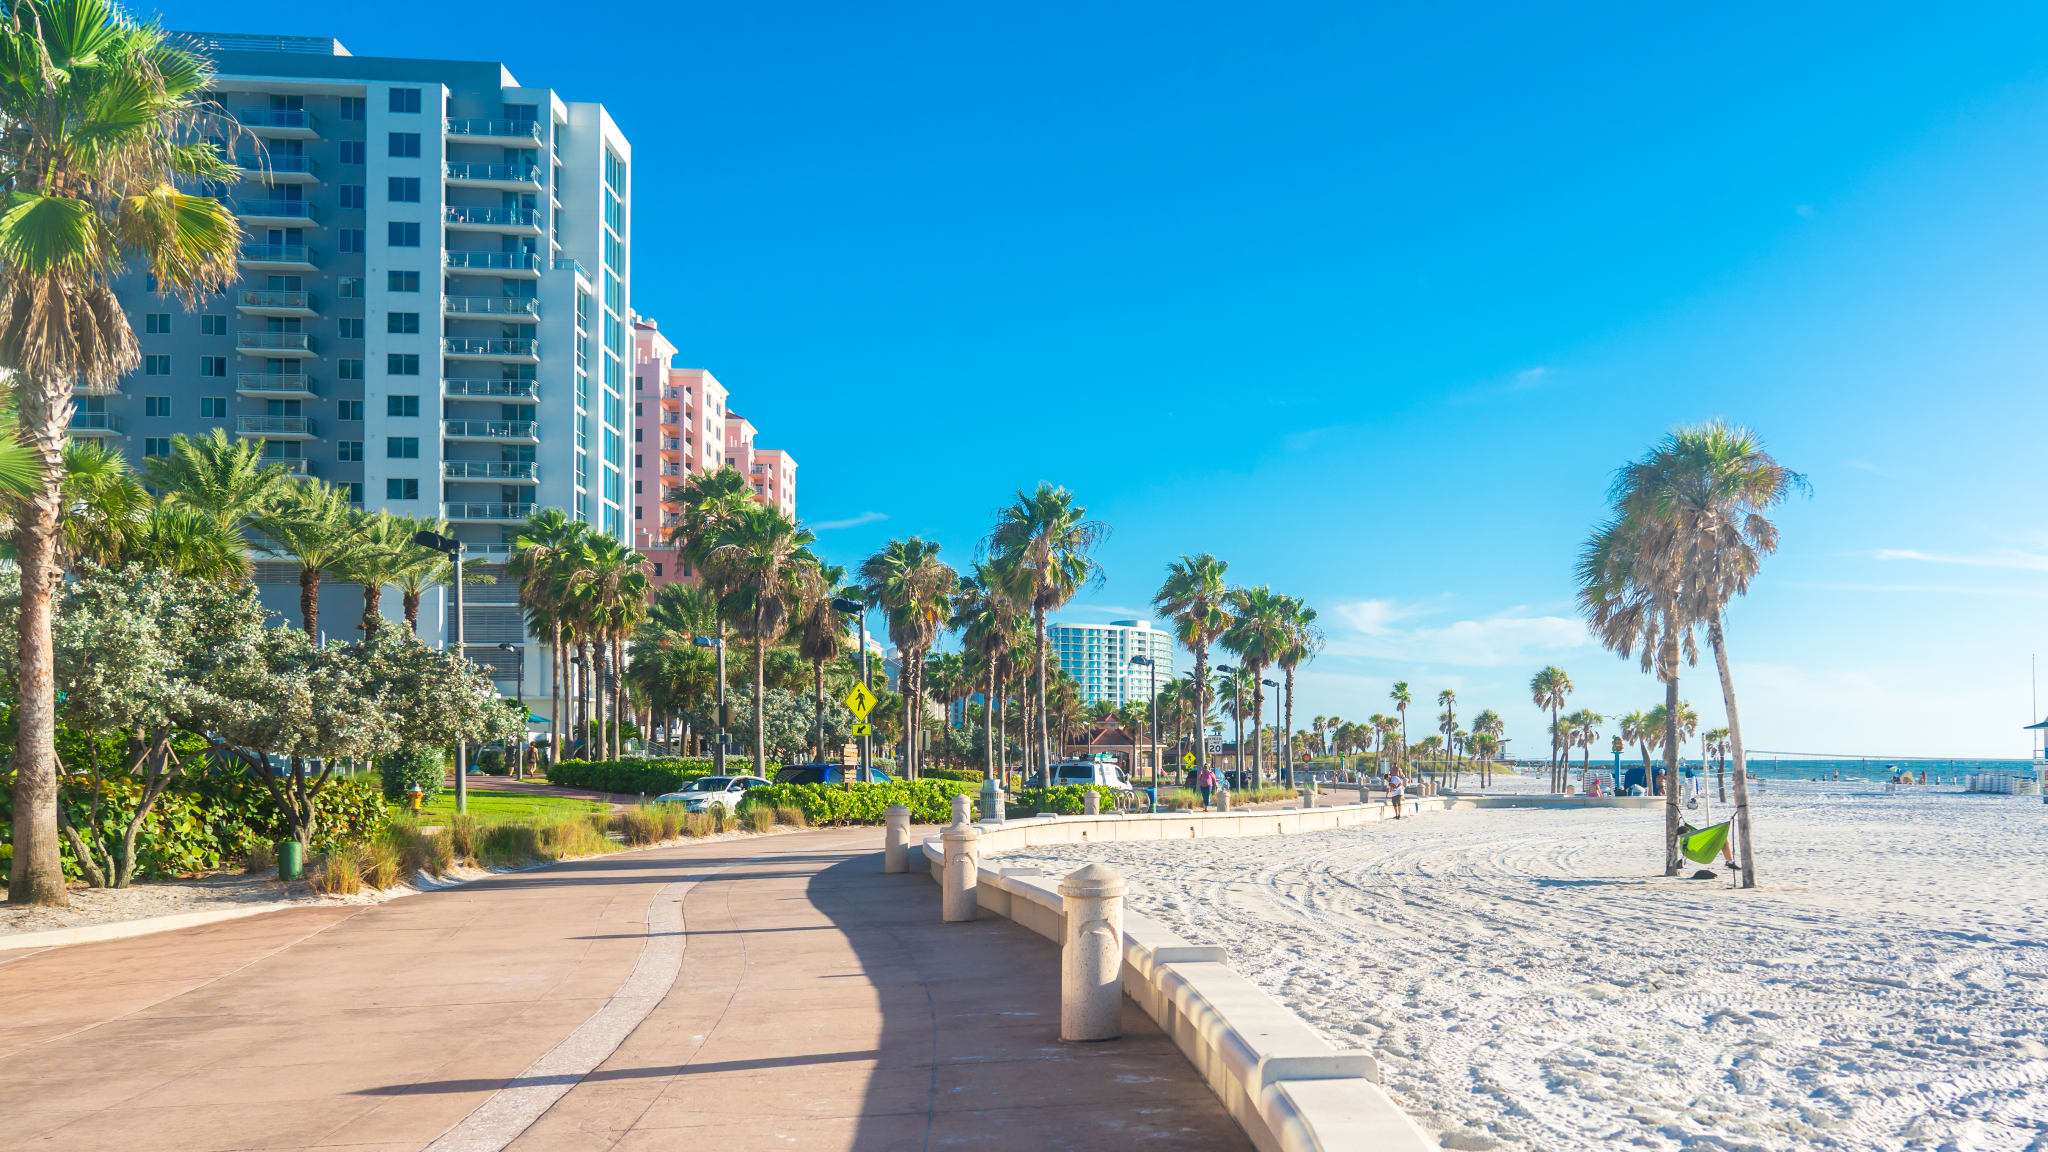 Strand in Clearwater, Florida